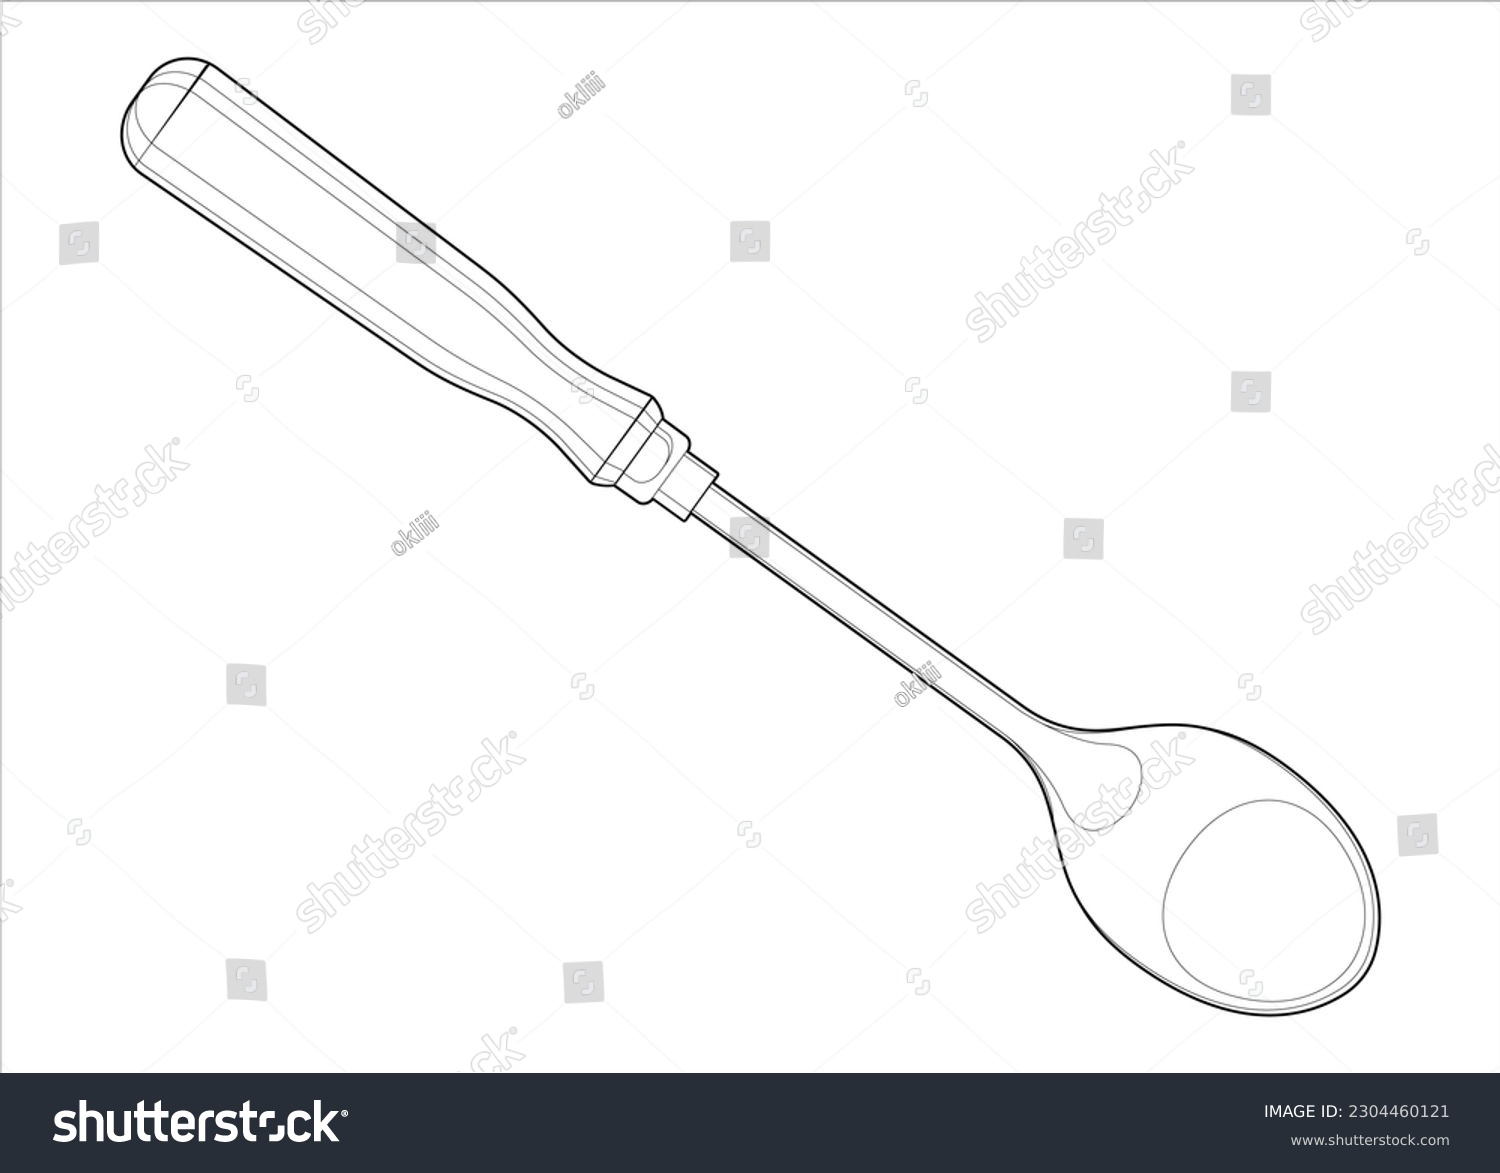 Coloring page culinary spoon isolated on stock vector royalty free